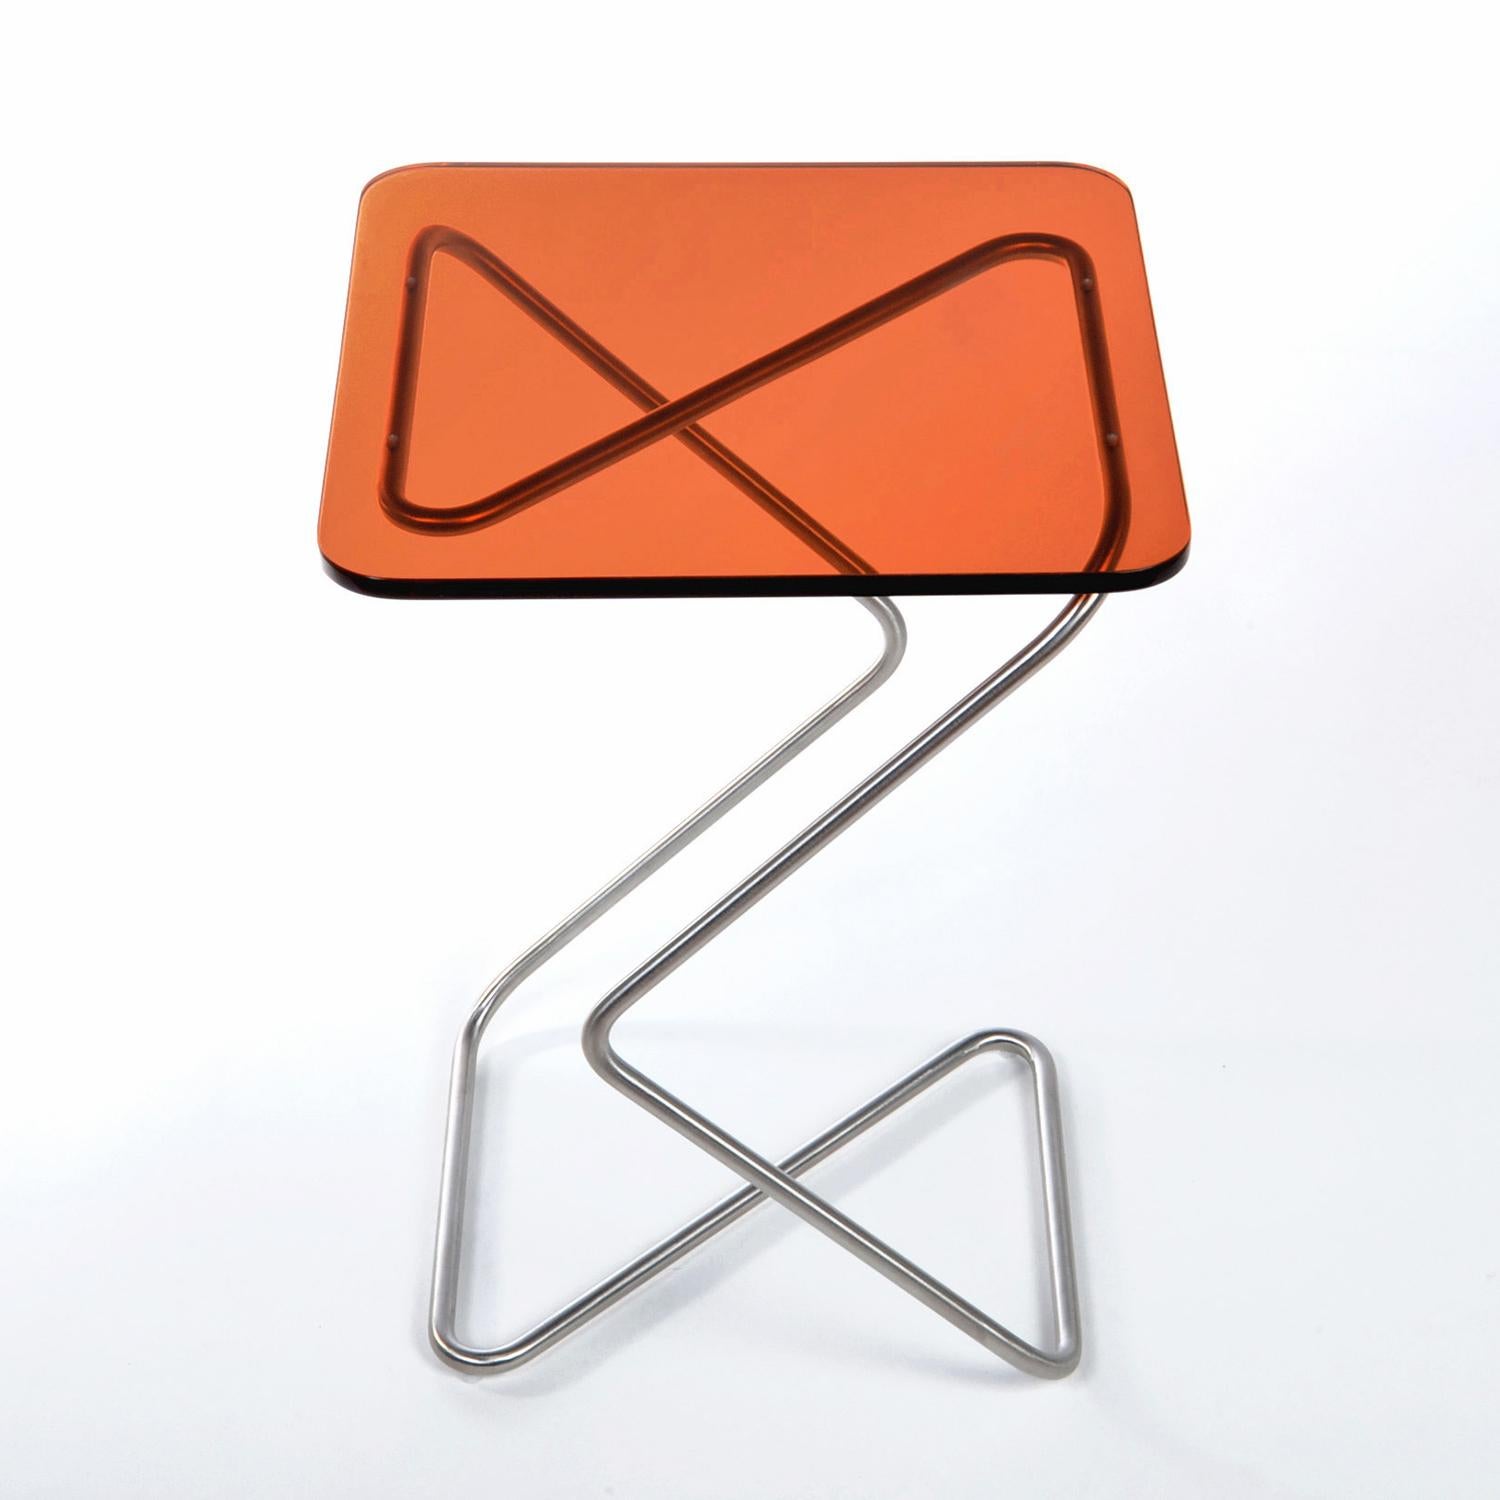 The square side table by Rita Kettaneh
Dimensions: The base: brushed stainless steel 
 optionally plated with copper or brass
 The top: acrylic
Materials: H 46 x W 33 x D 33 cm
Weight: 3.75 Kg

Colors and finishes: 
Stainless finish: Burnt